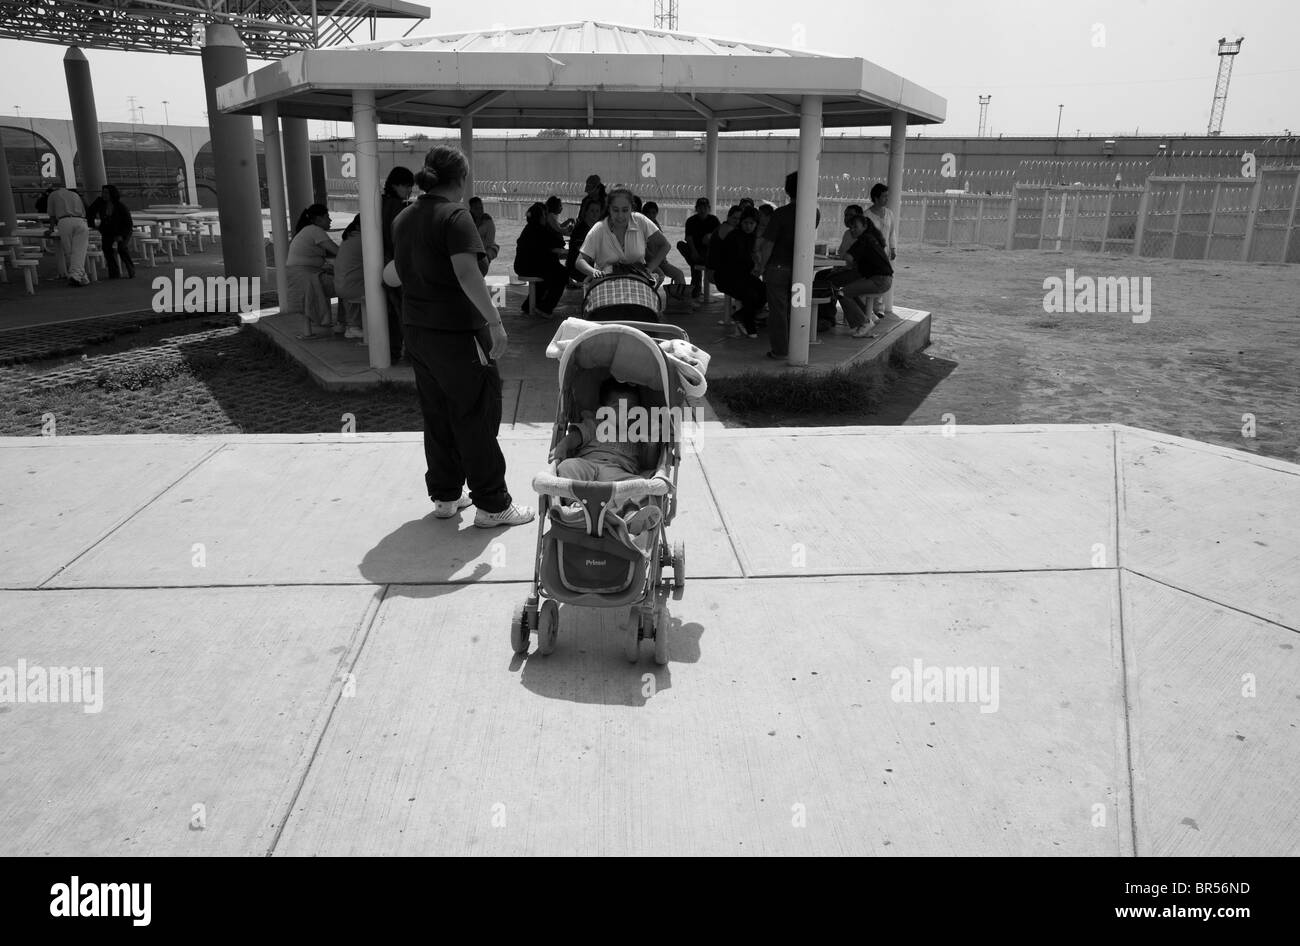 A baby in a stroller in a prison yard in Mexico D.F. Stock Photo